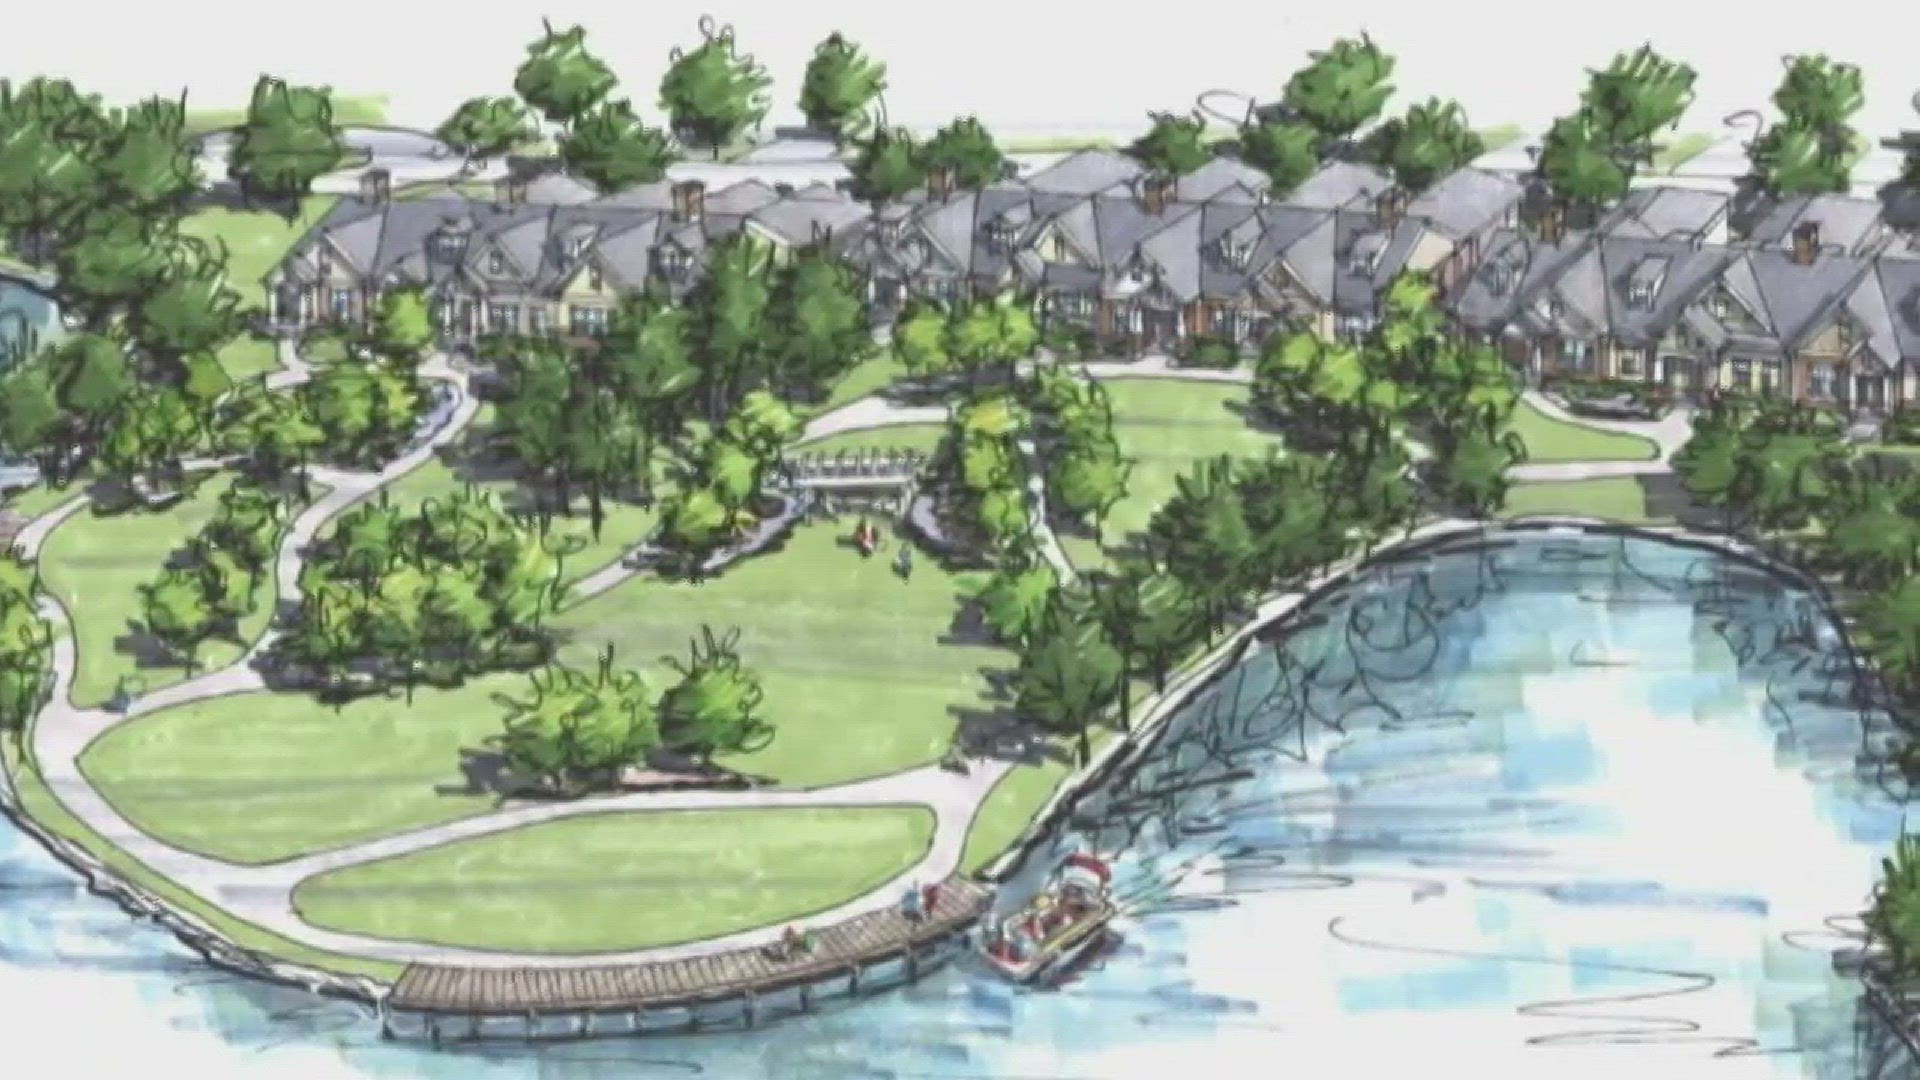 Sep. 13, 2018: The MPC gave the go ahead Thursday afternoon for a controversial southwest Knox County lakefront residential development.